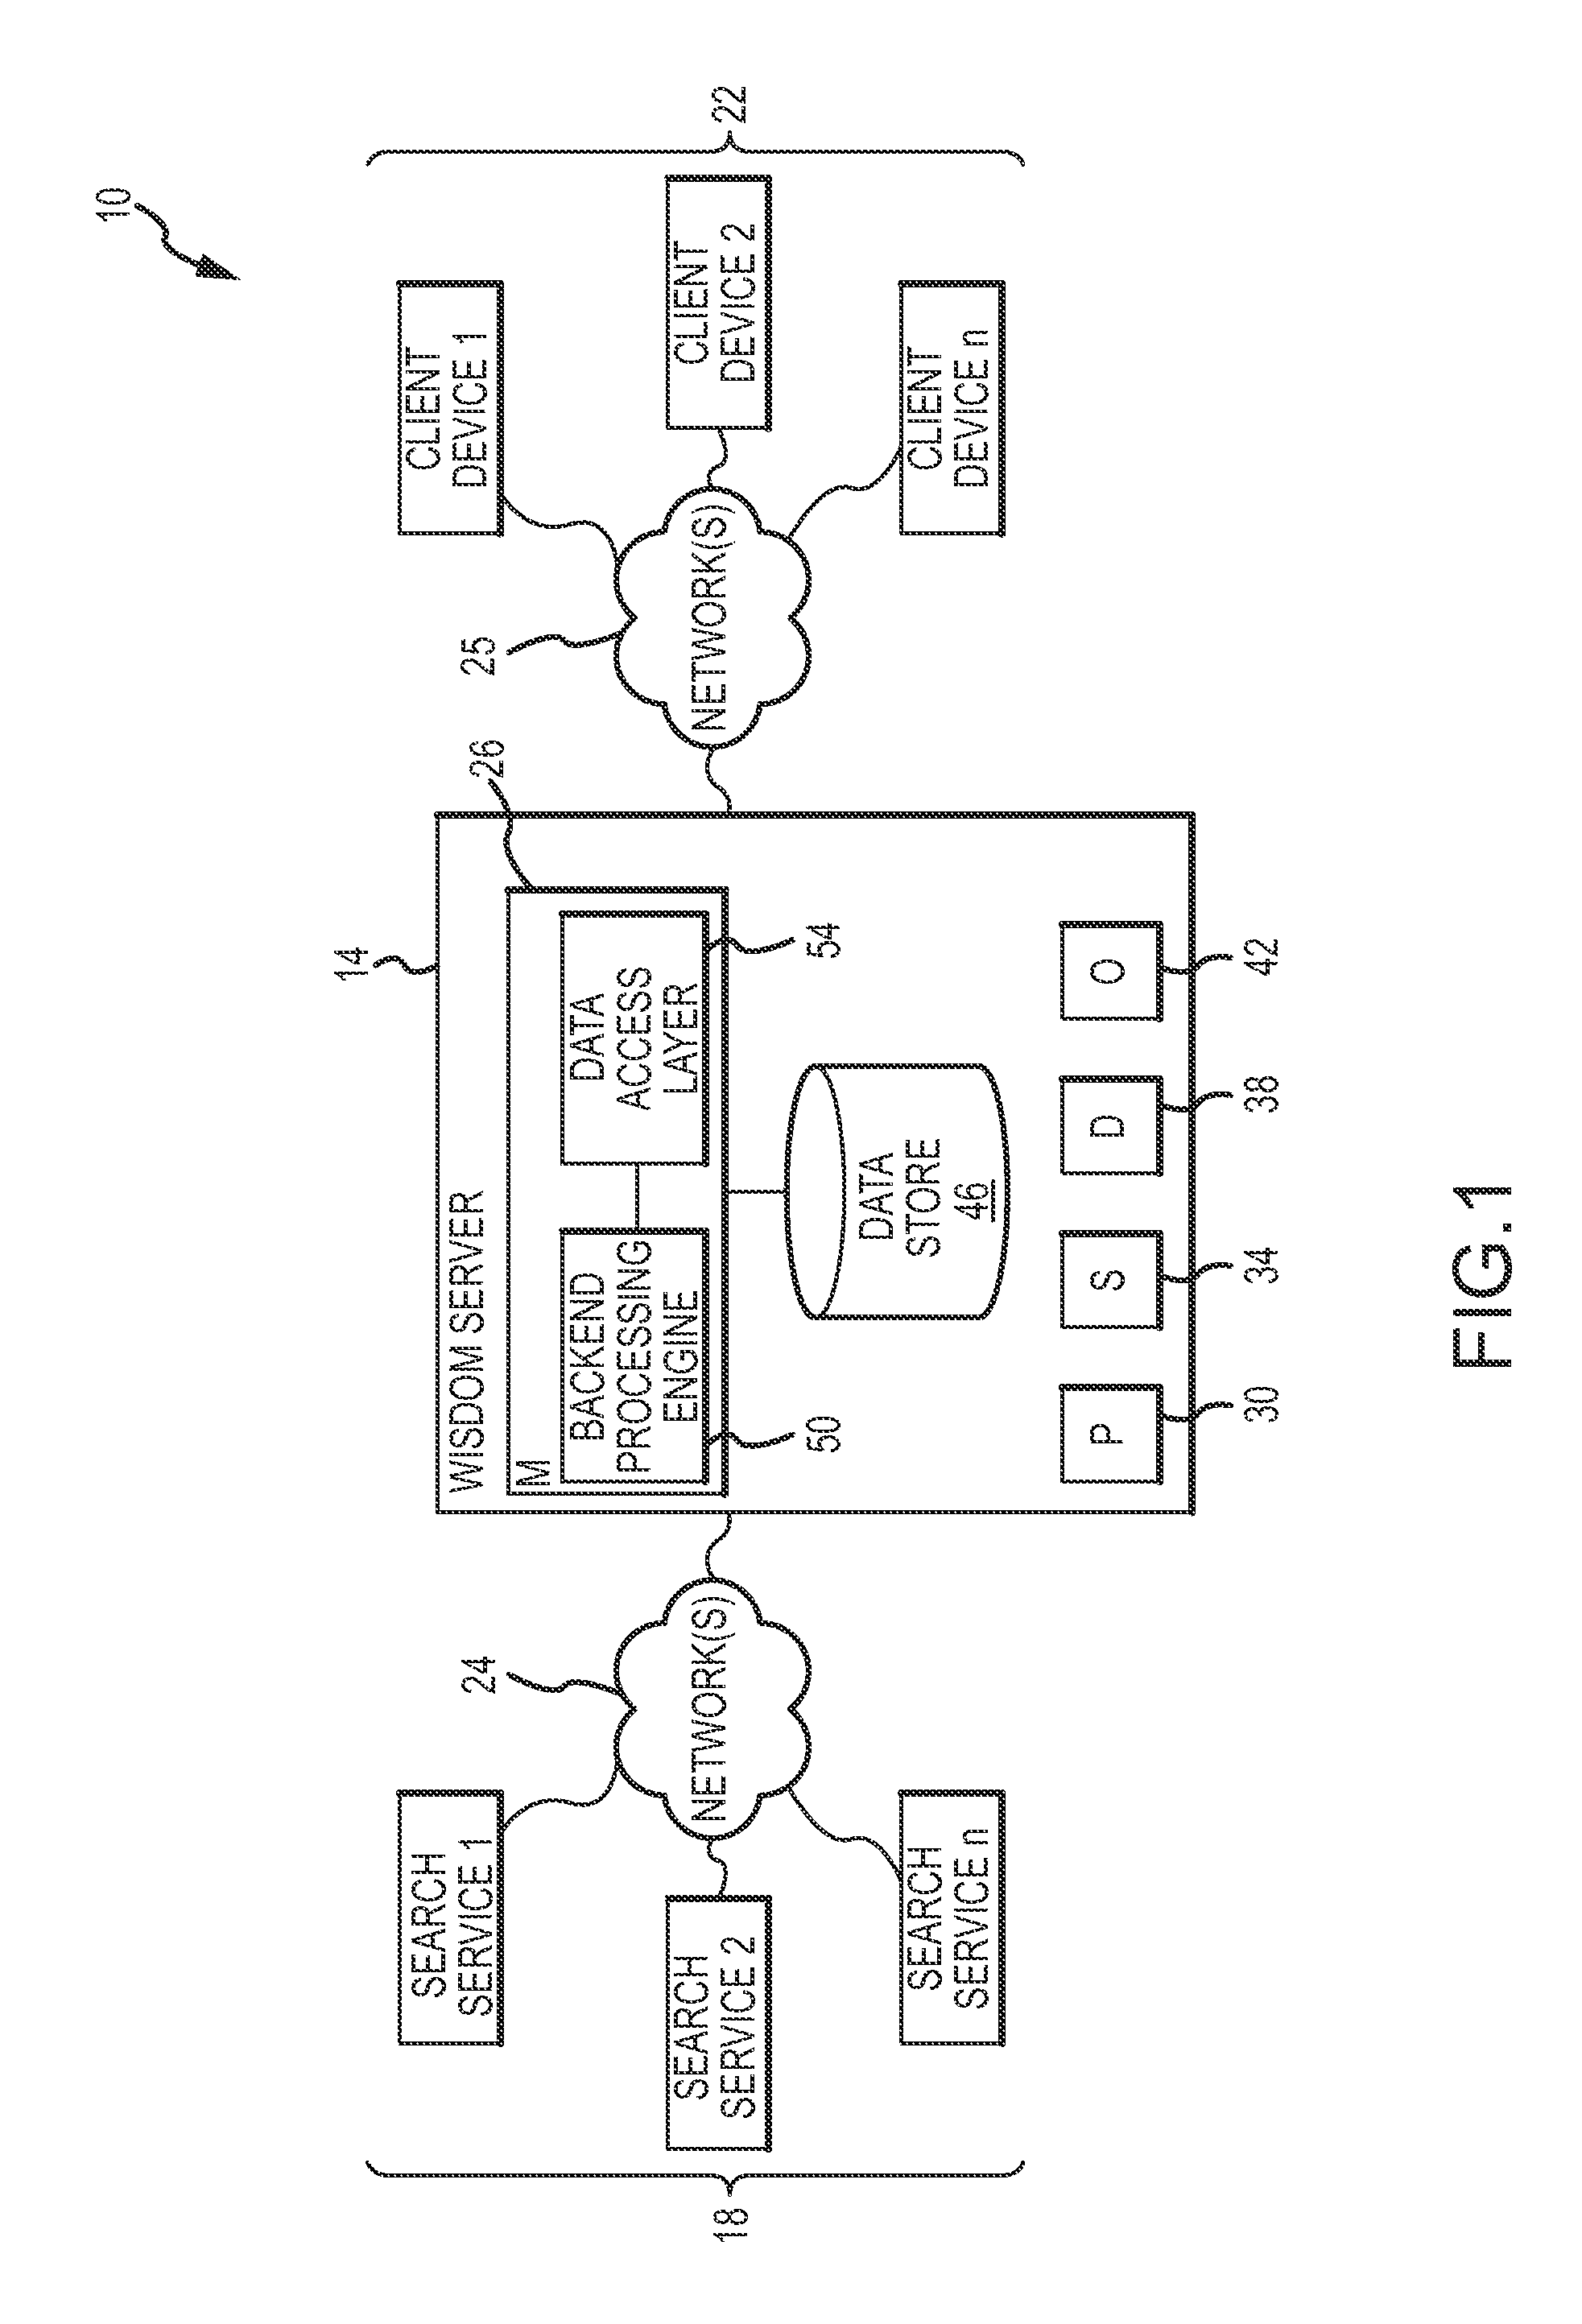 Systems and methods for facilitating open source intelligence gathering